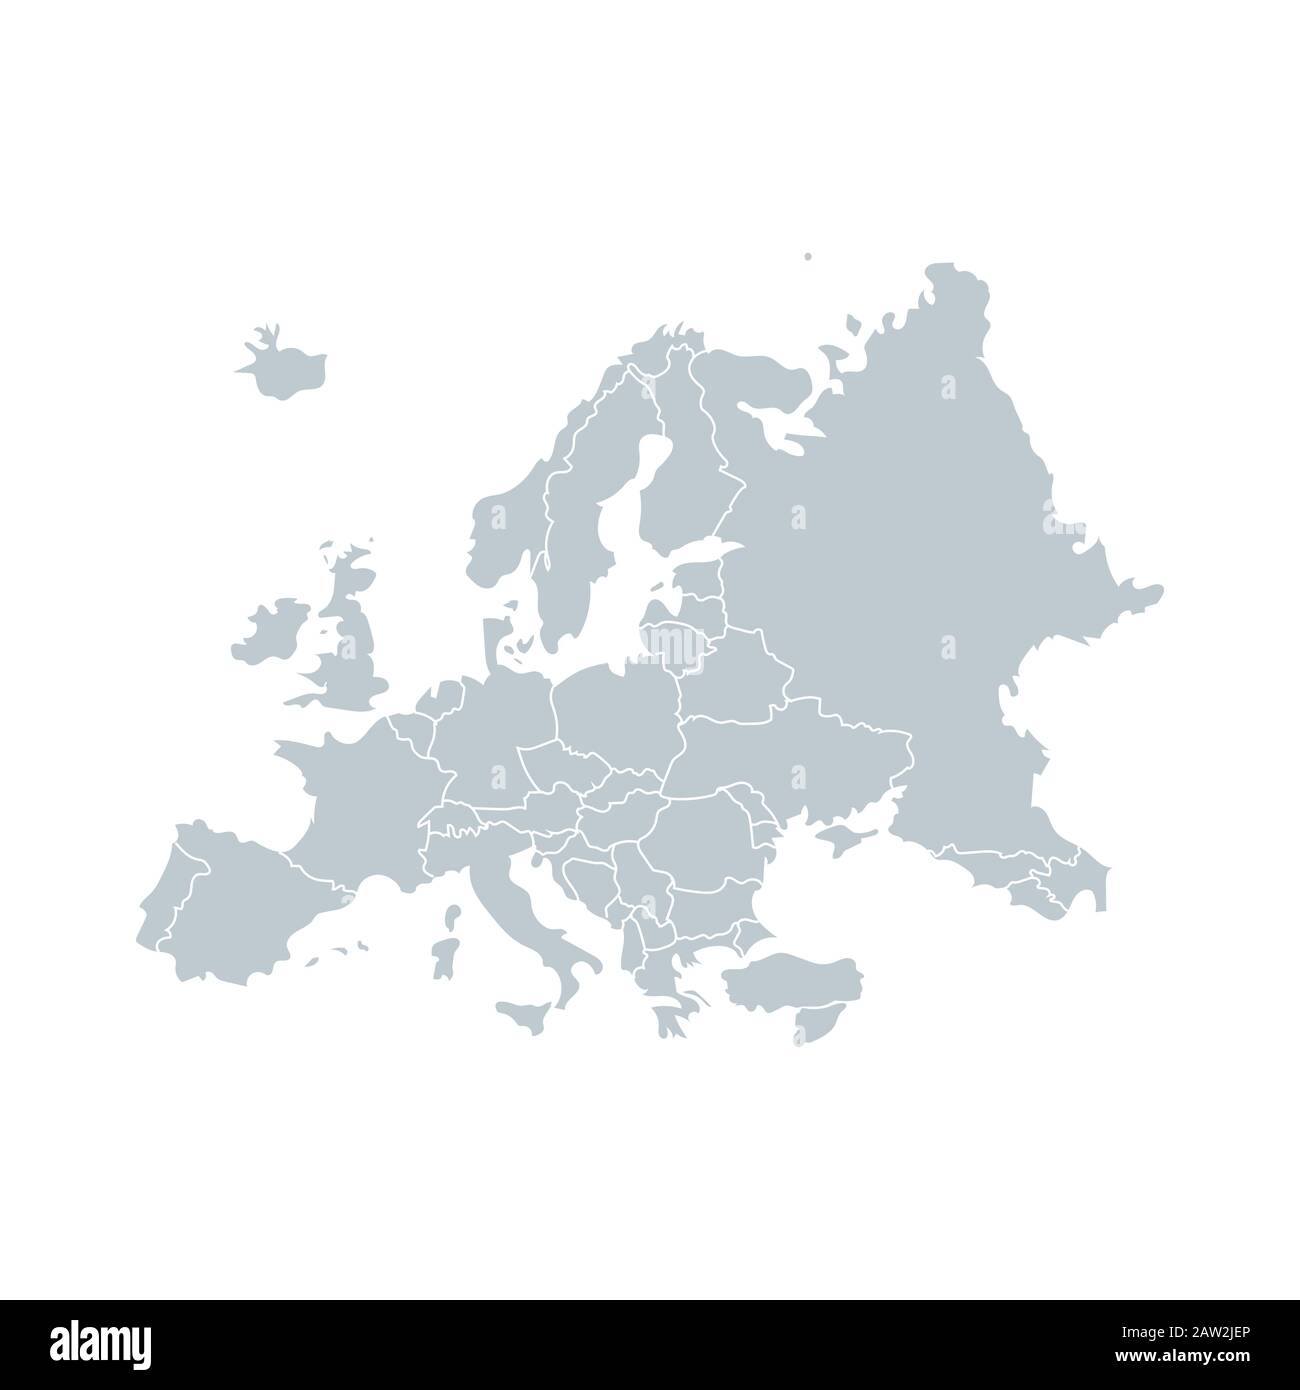 Detailed vector map of the Europe - Vector illustration Stock Vector